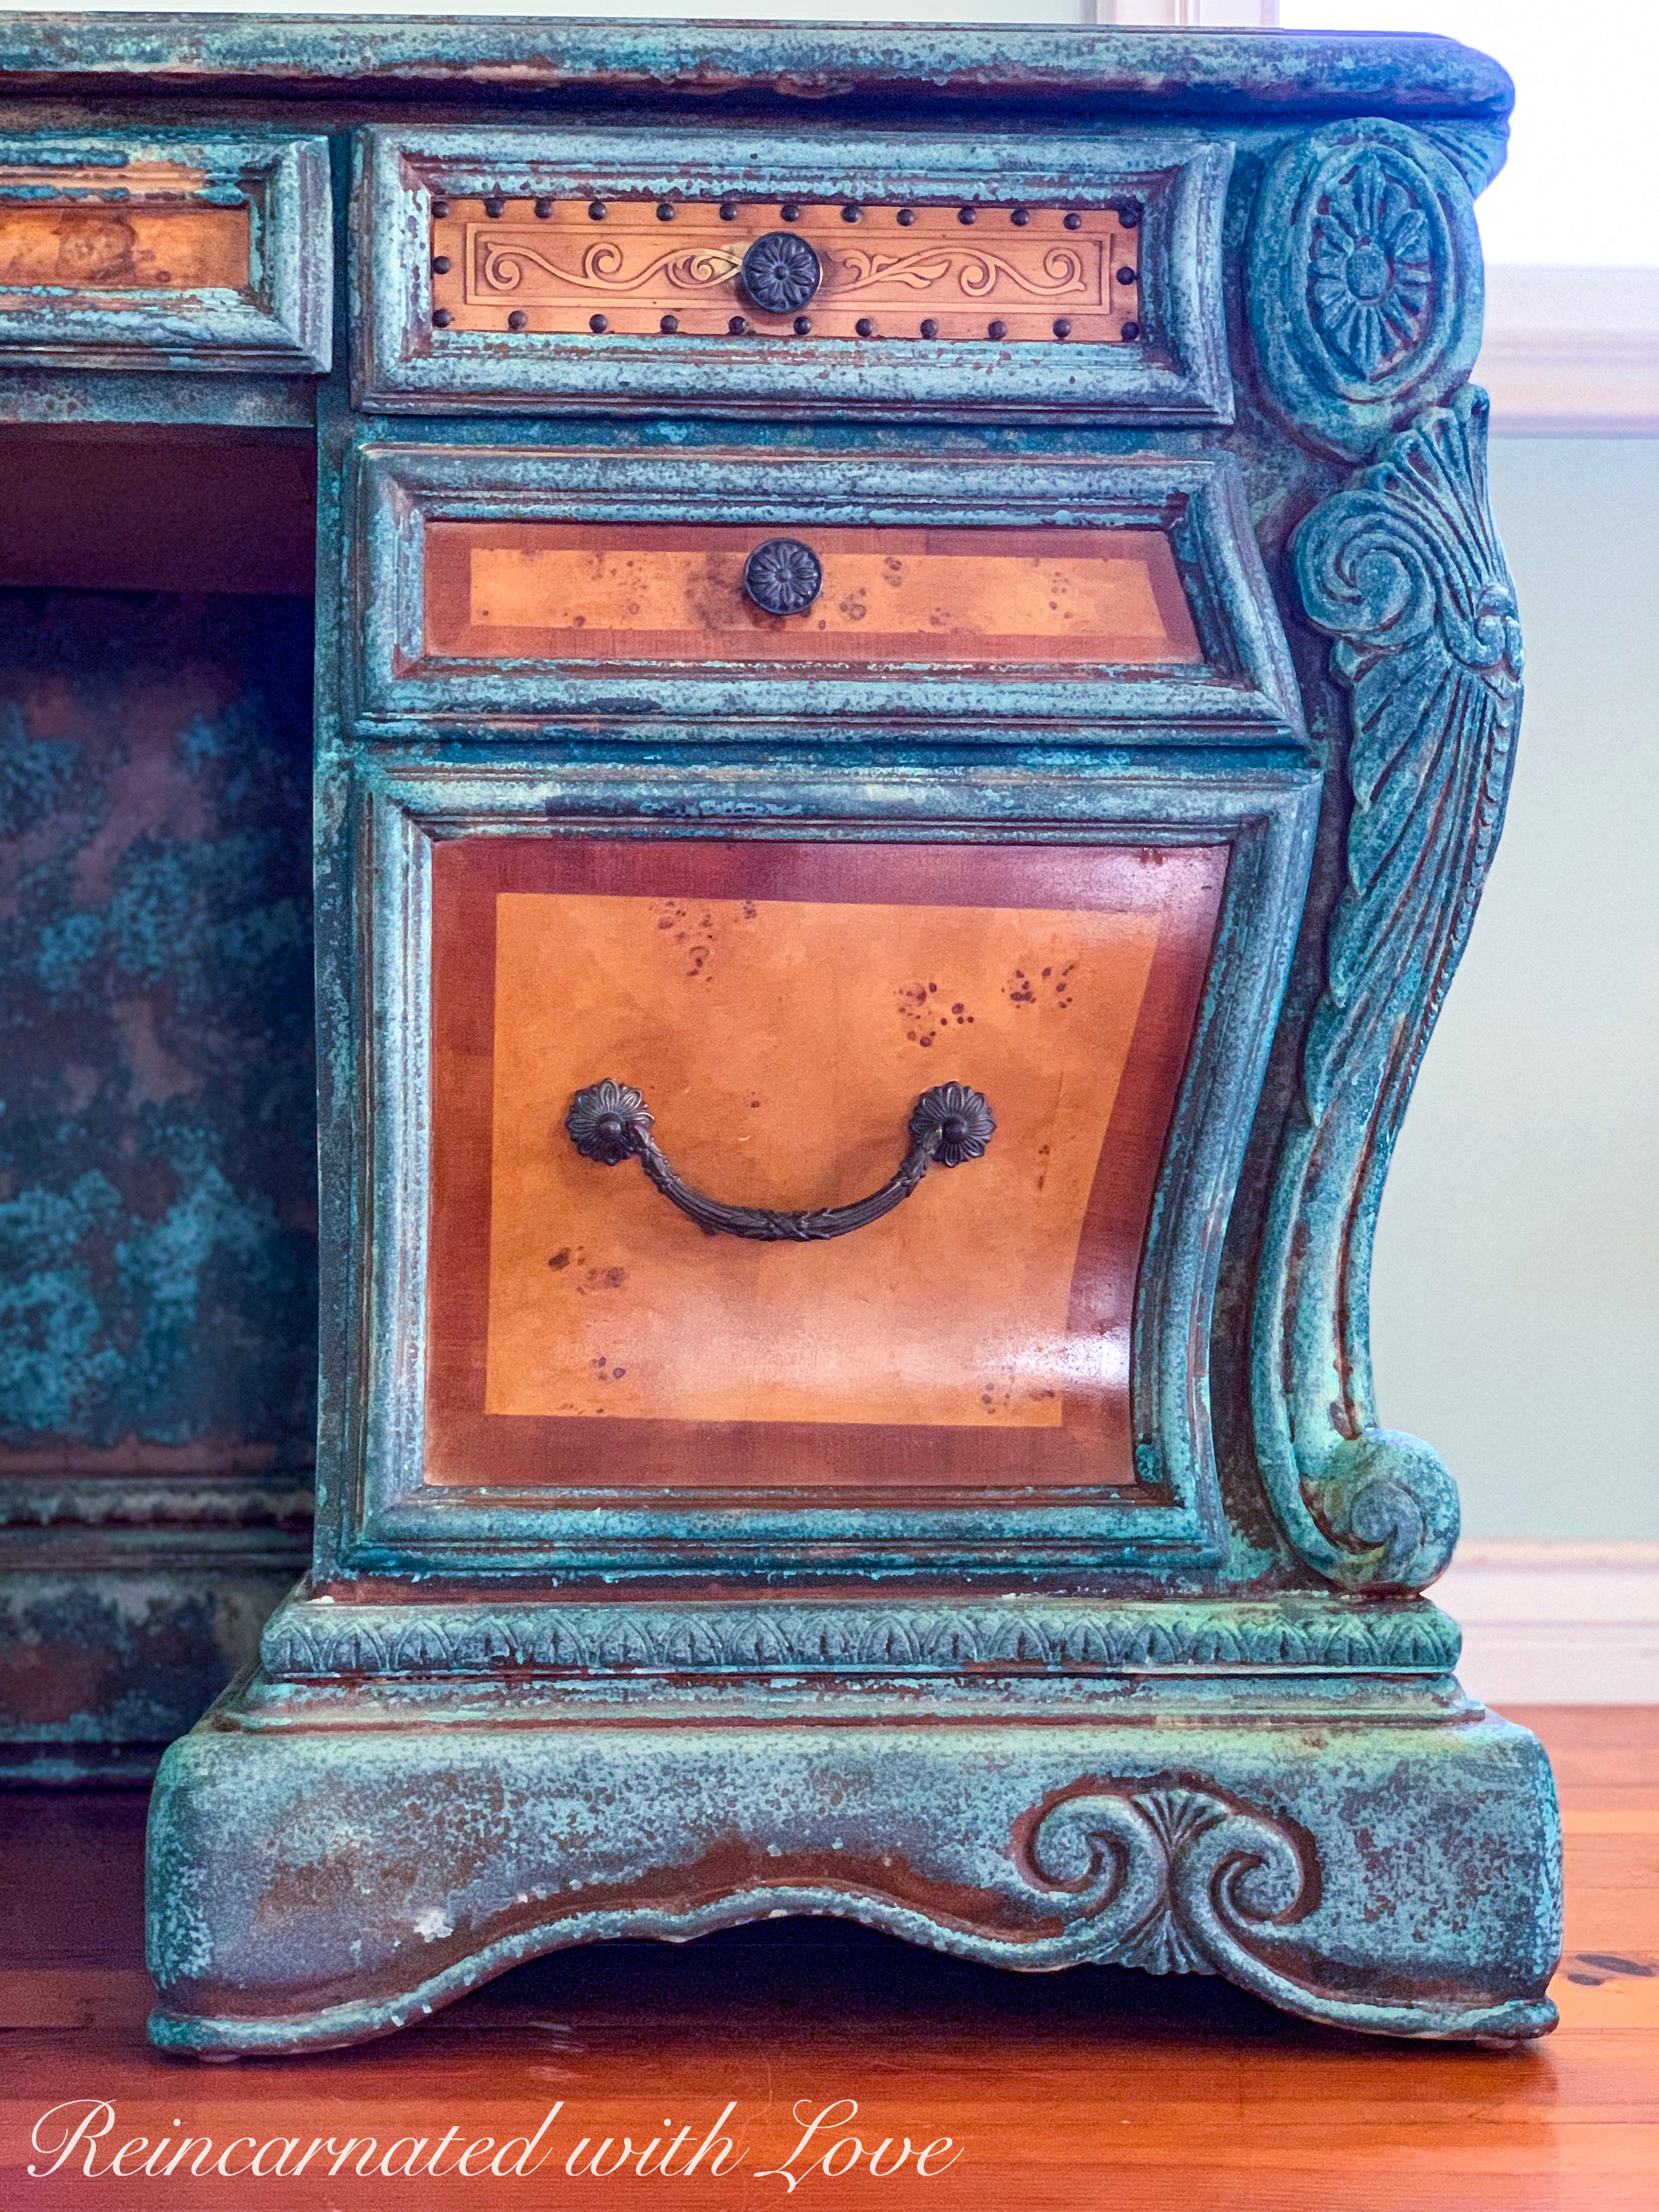 Close up of the drawers on a boho style desk, showing the wood carved accents & details in the blue & green finish.